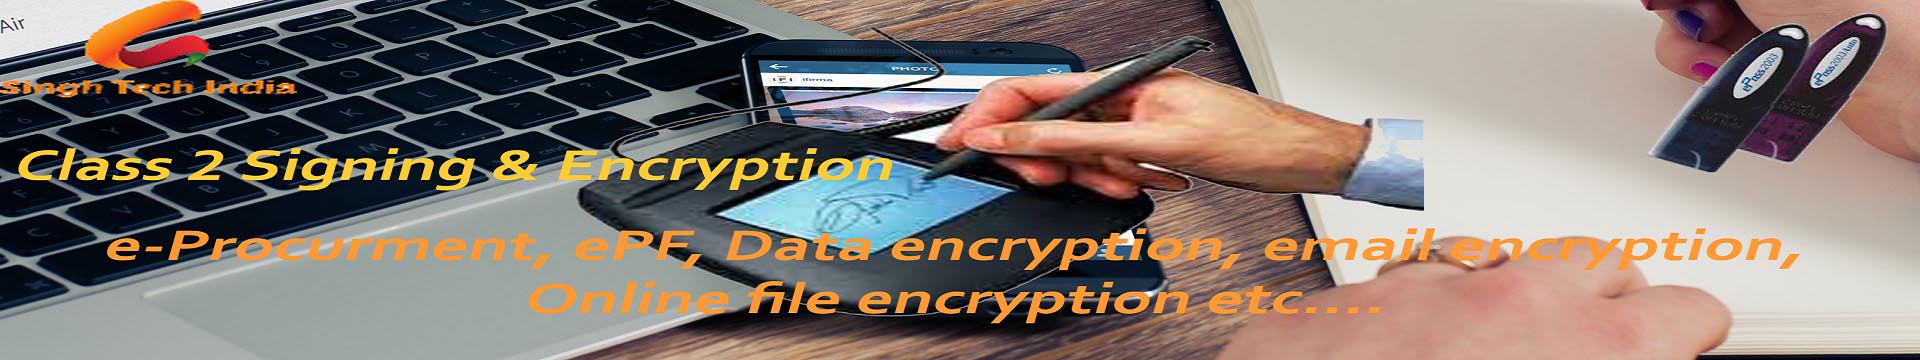 class 2 signing & encryption DSC 